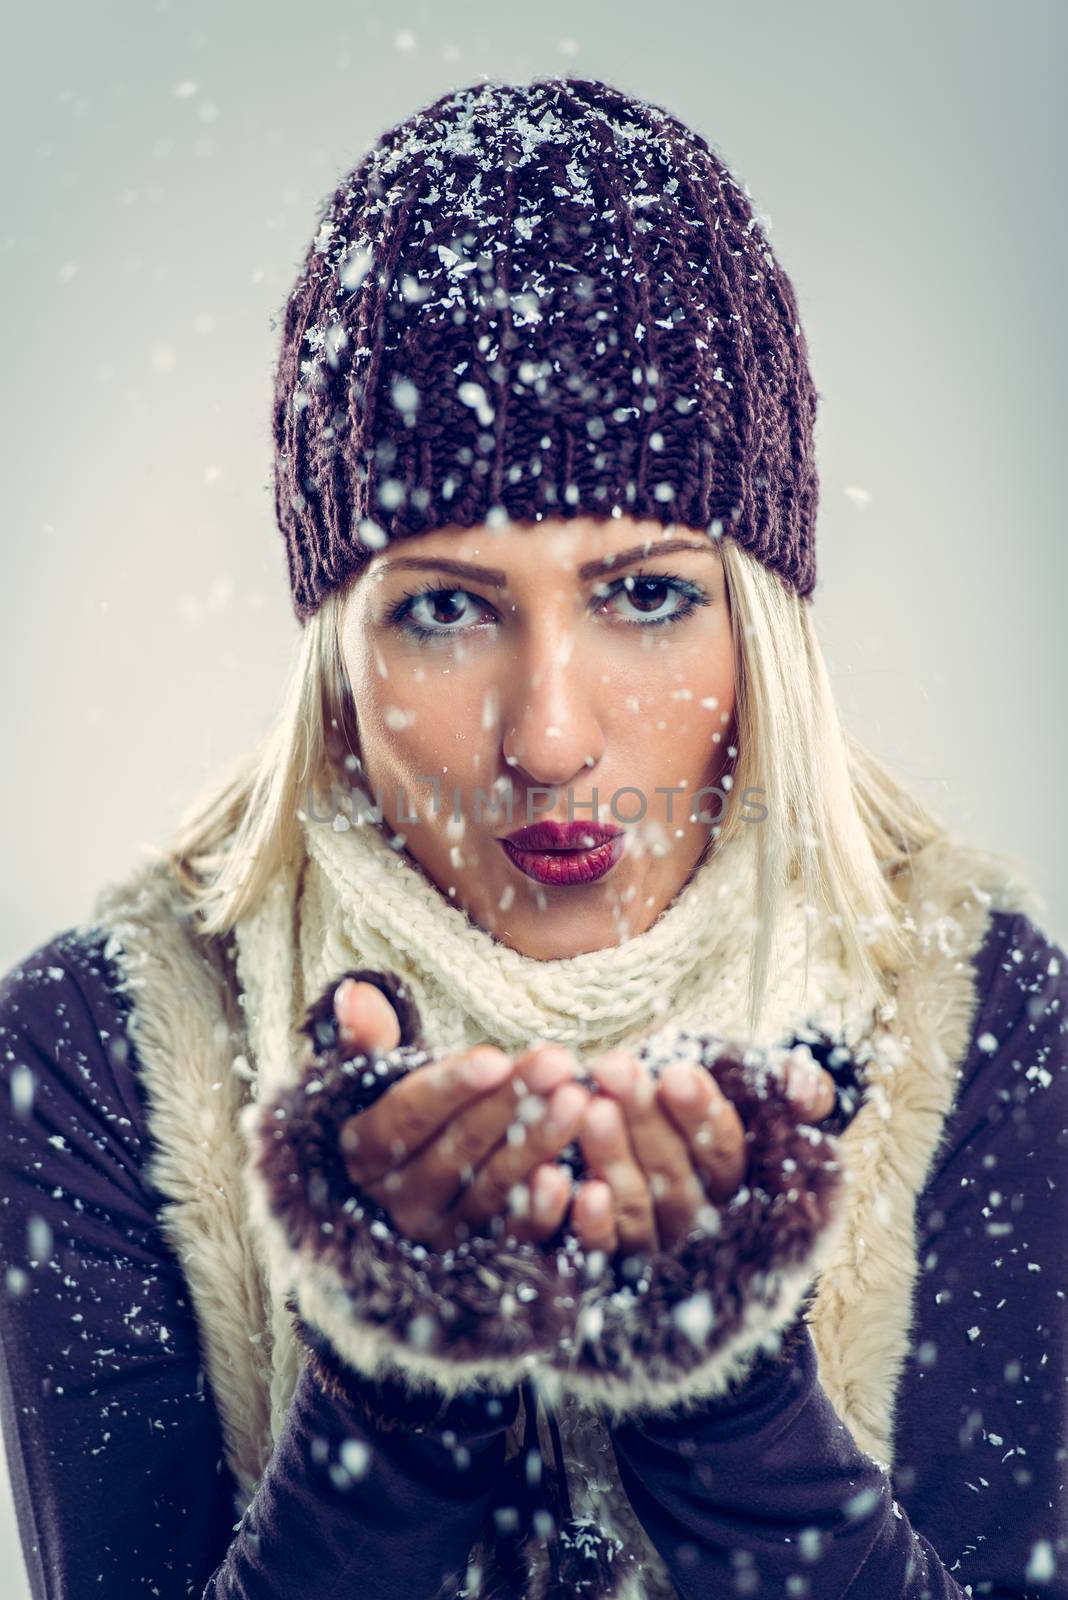 Cute Girl Blowing Snowflakes by MilanMarkovic78